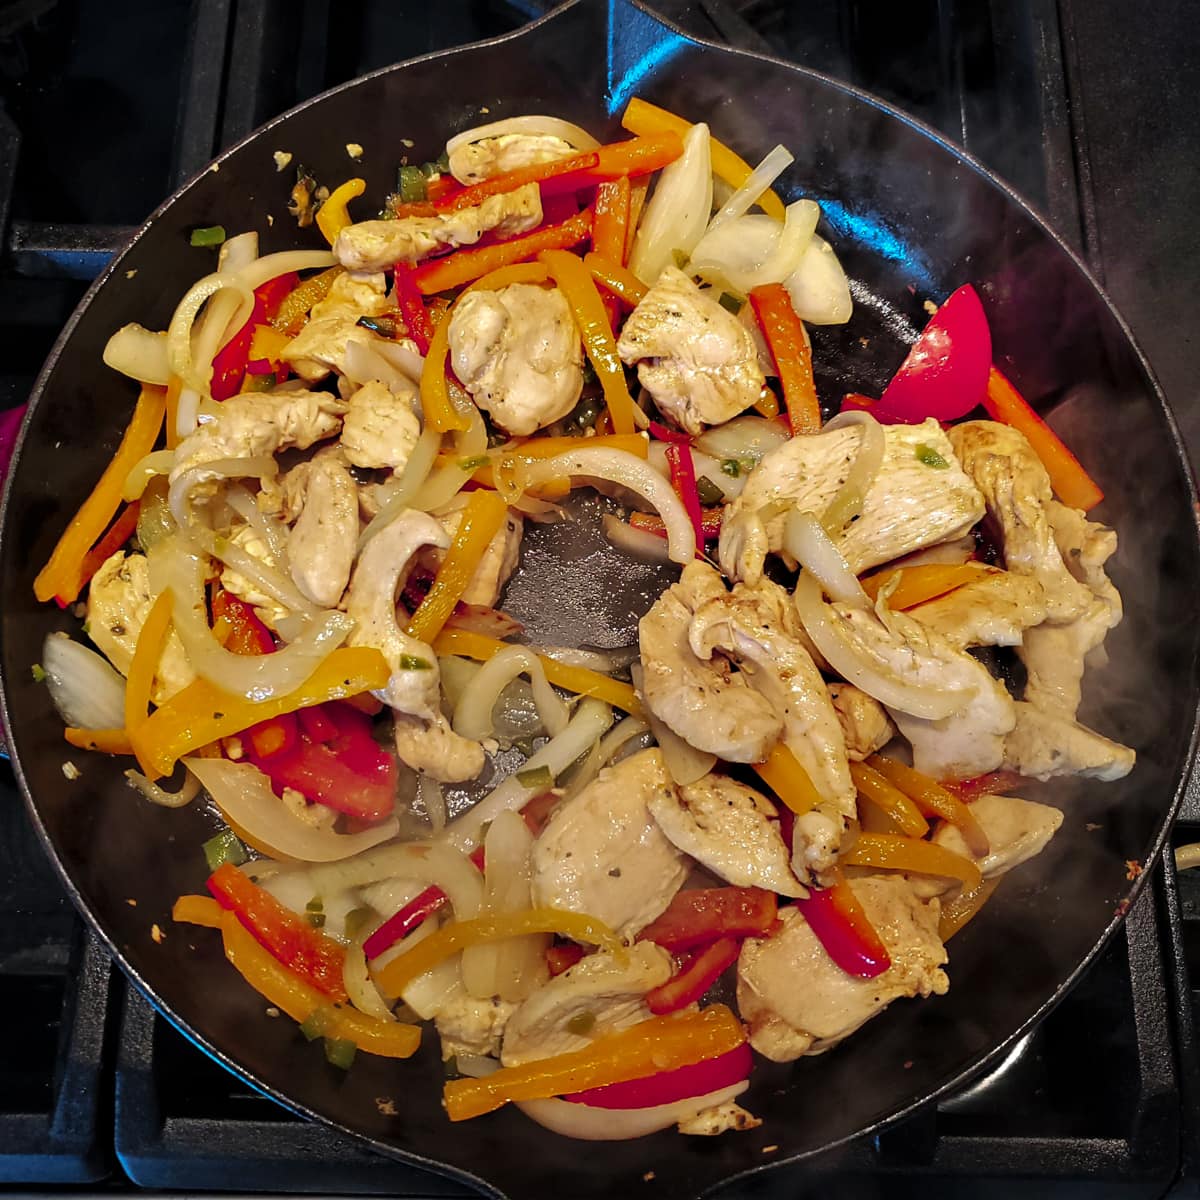 Chicken and peppers in a cast iron skillet.